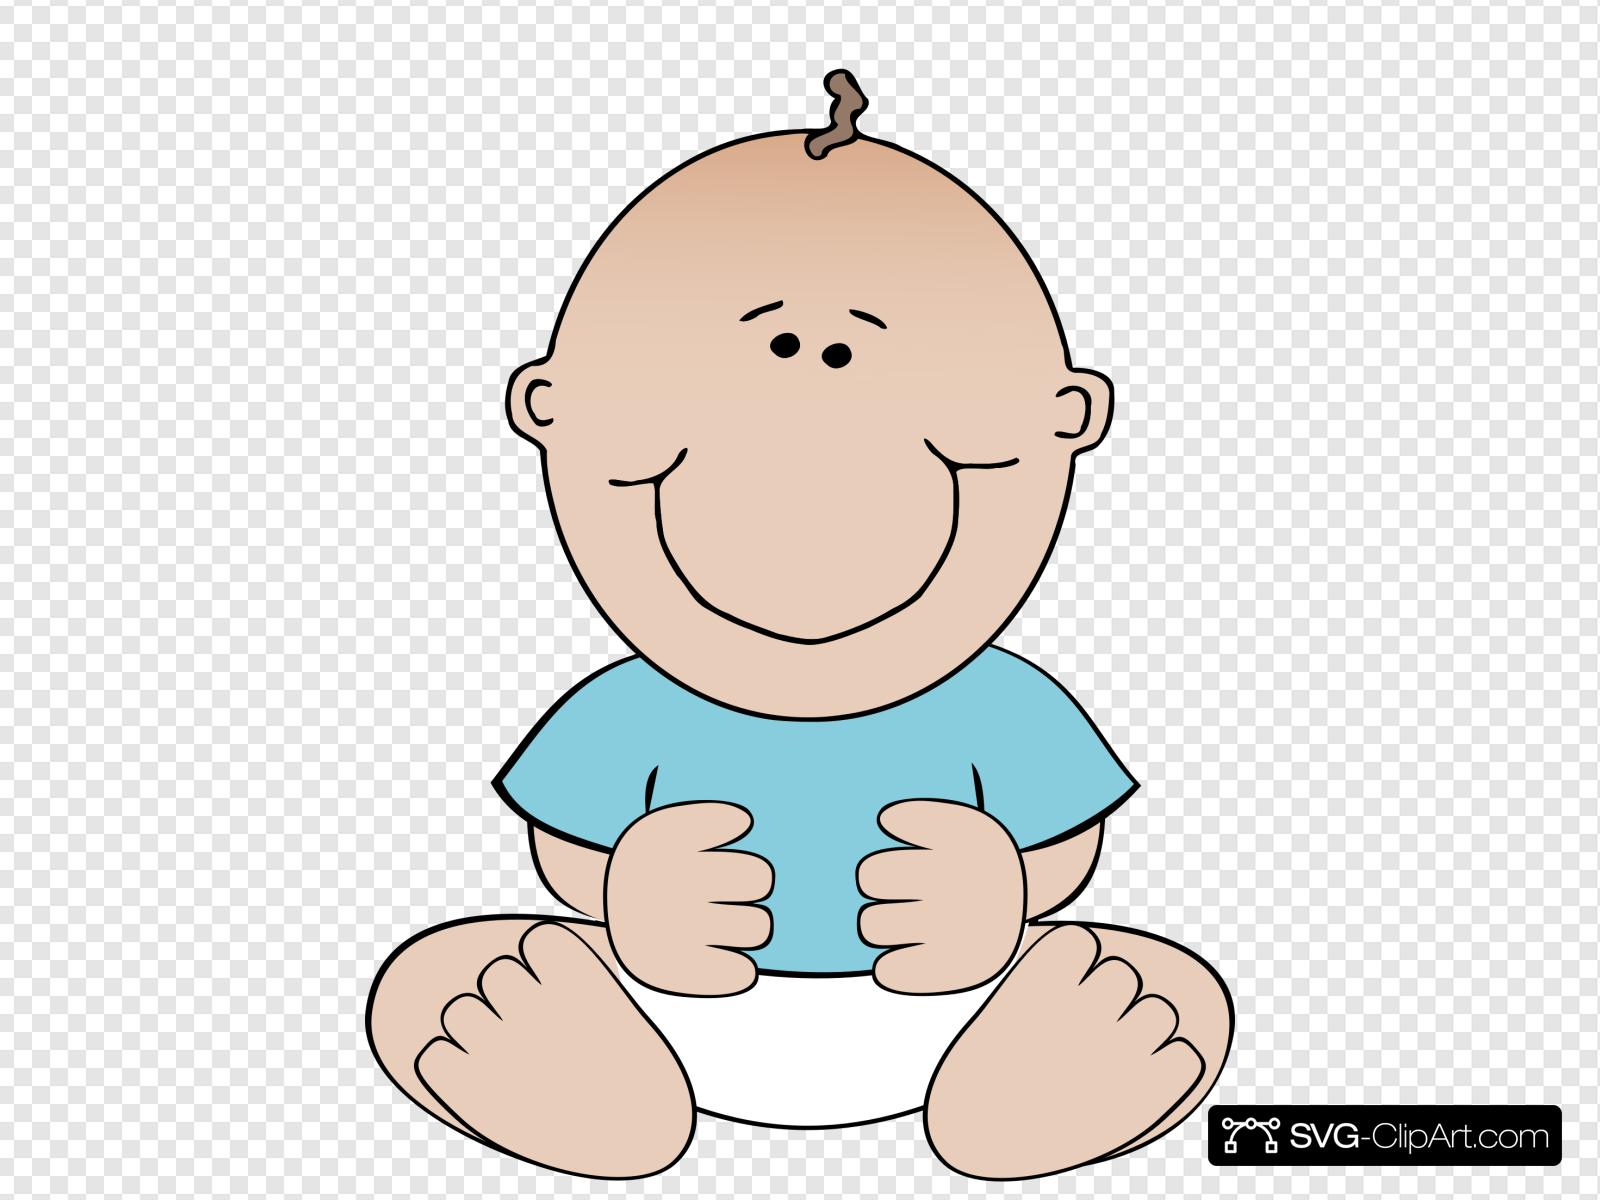 Baby Boy Sitting Clip art, Icon and SVG.